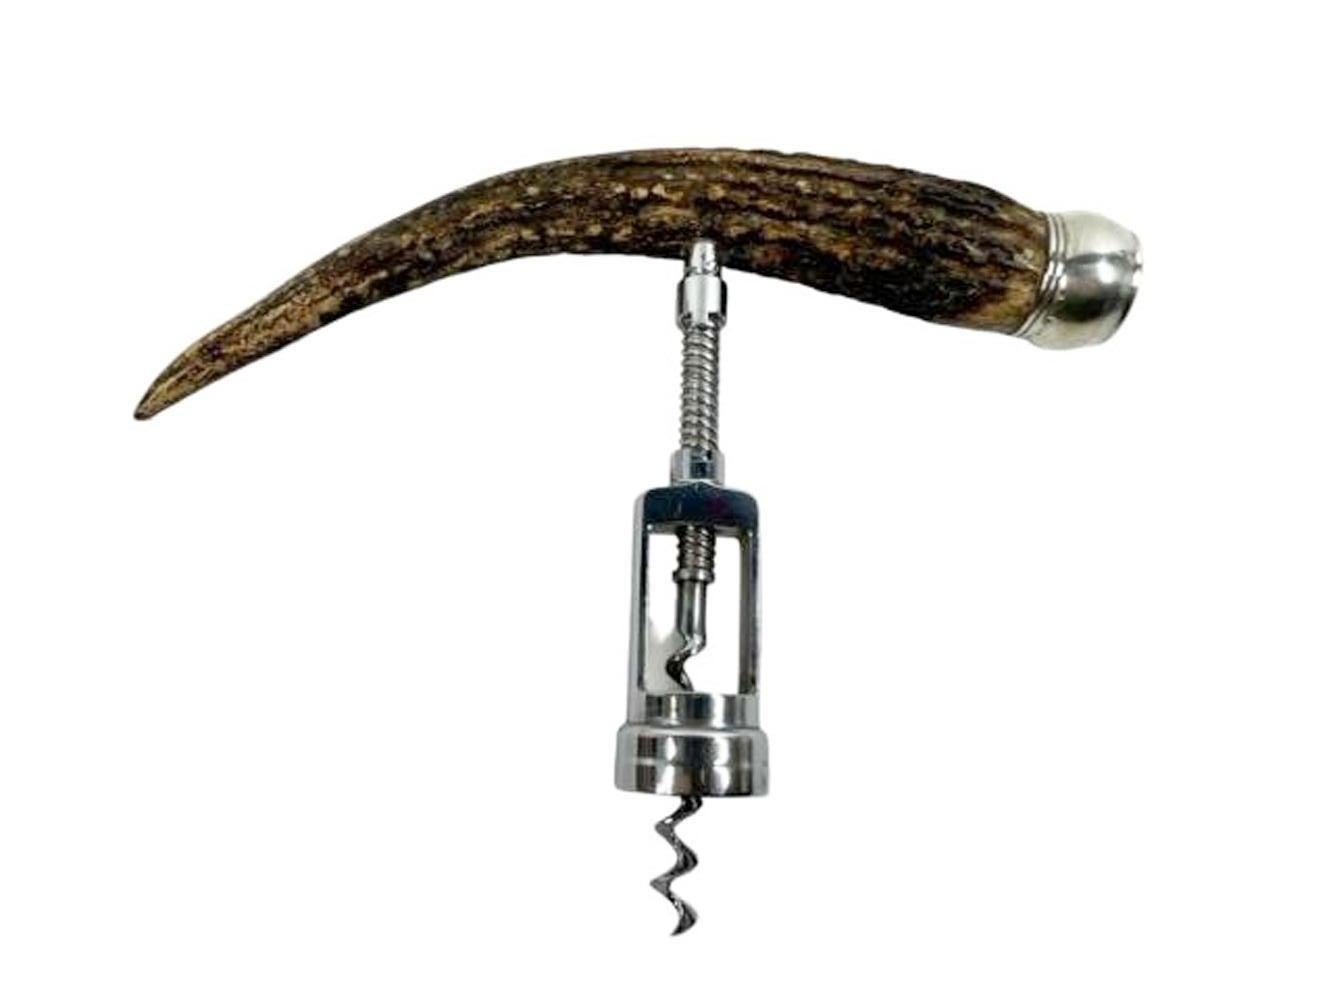 Stag horn double pillar mechanical corkscrew with an unusually large 10